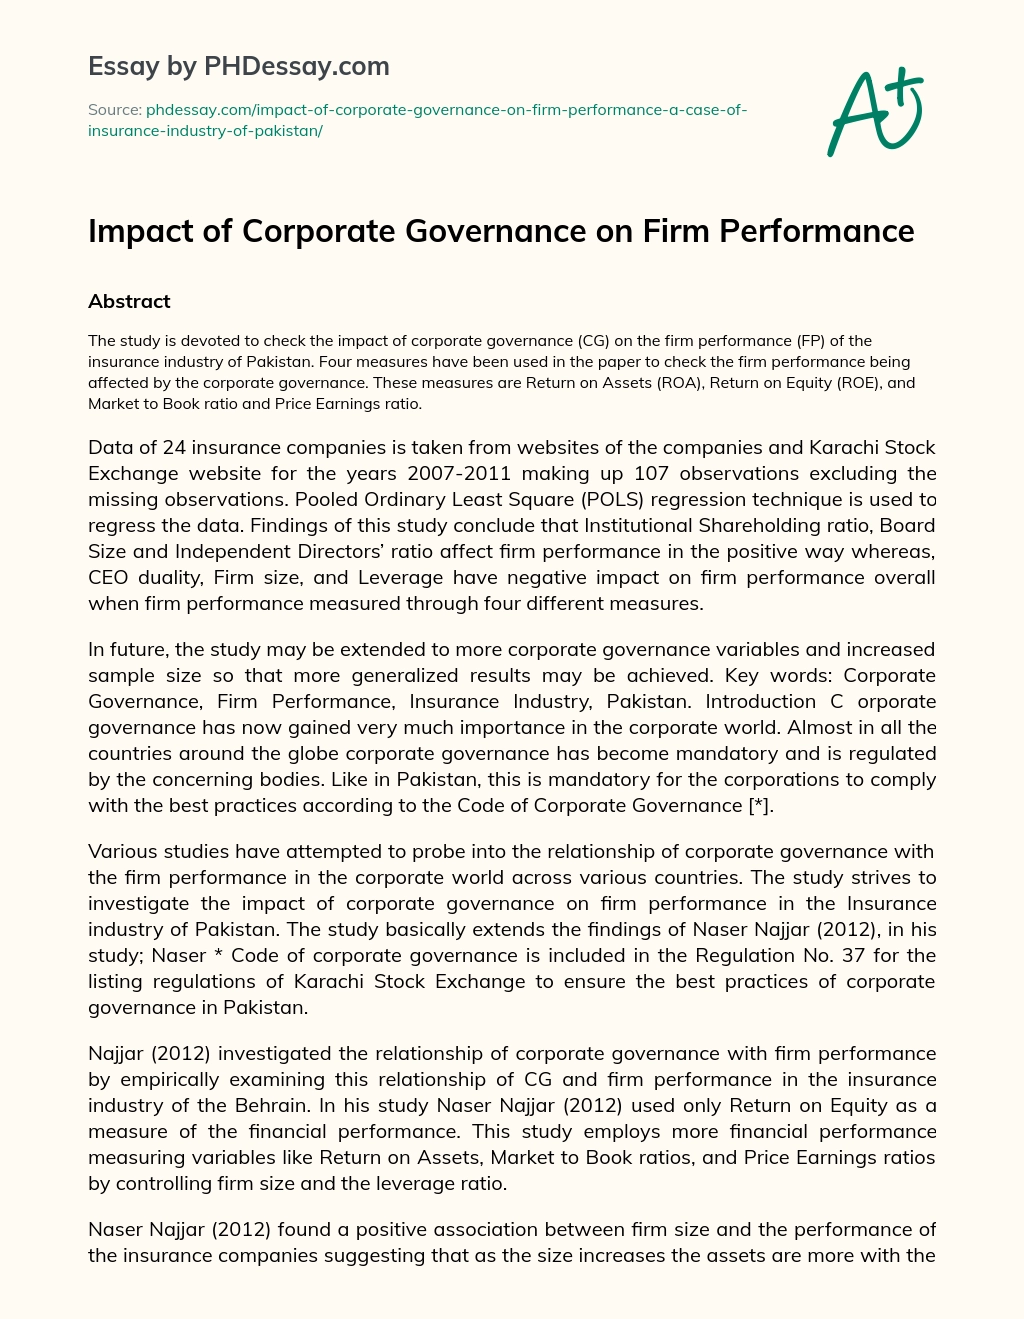 Impact of Corporate Governance on Firm Performance essay